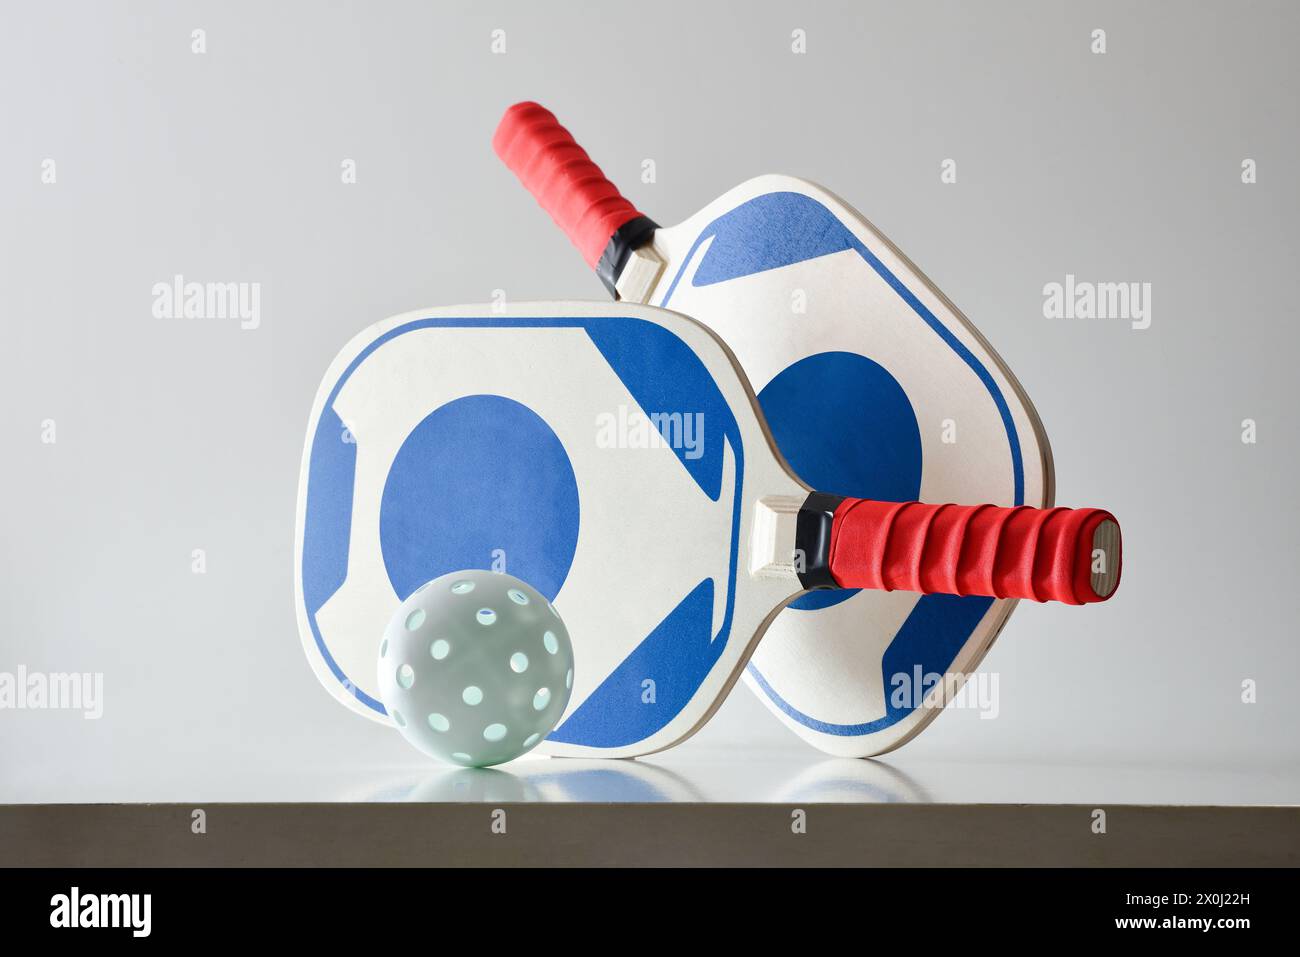 Two blue and red pickleball rackets and a white ball on white table and white isolated background. Front view. Stock Photo